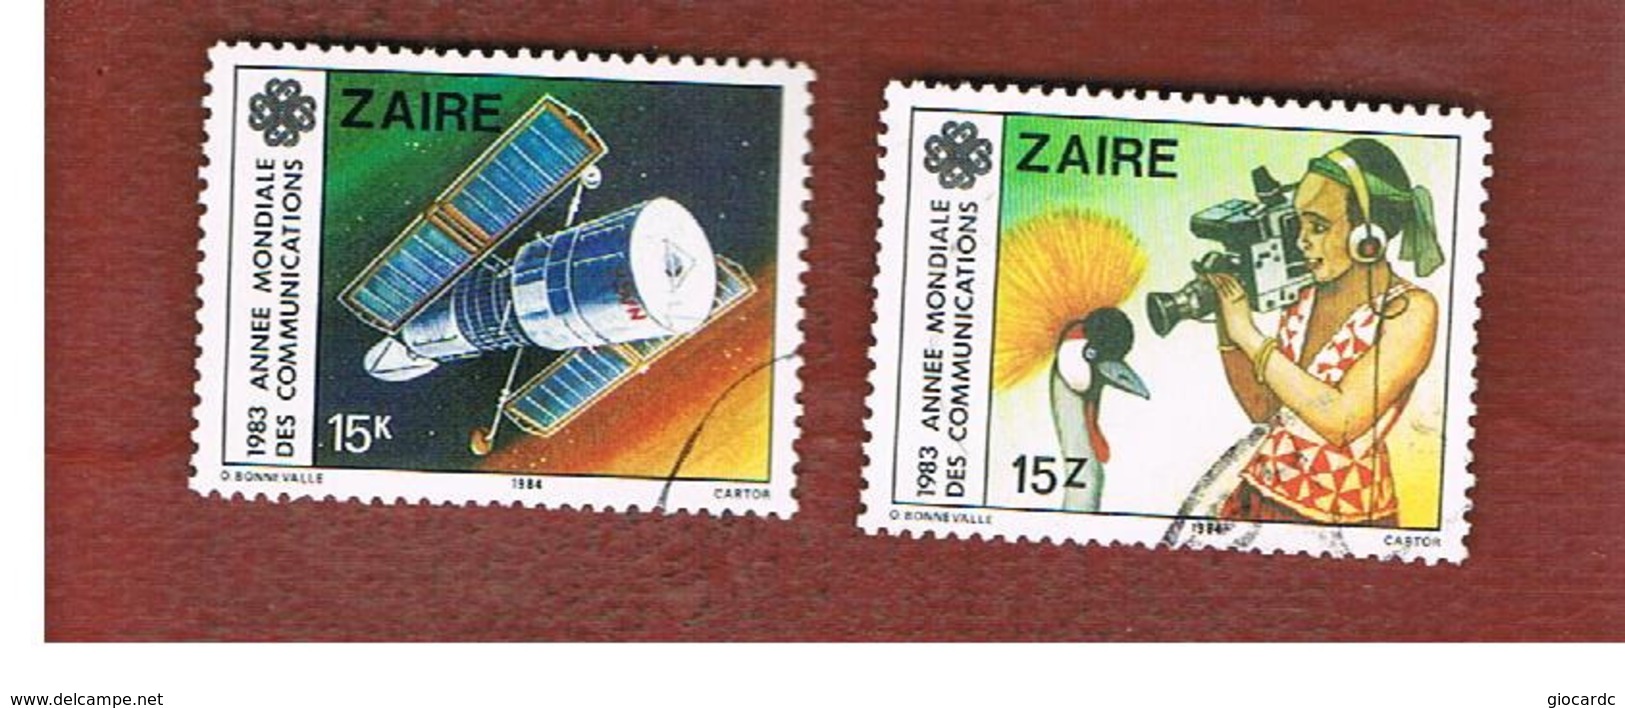 ZAIRE  -  SG 1181.1184  -  1984    WORLD COMMUNICATIONS YEAR   - USED ° - Usados